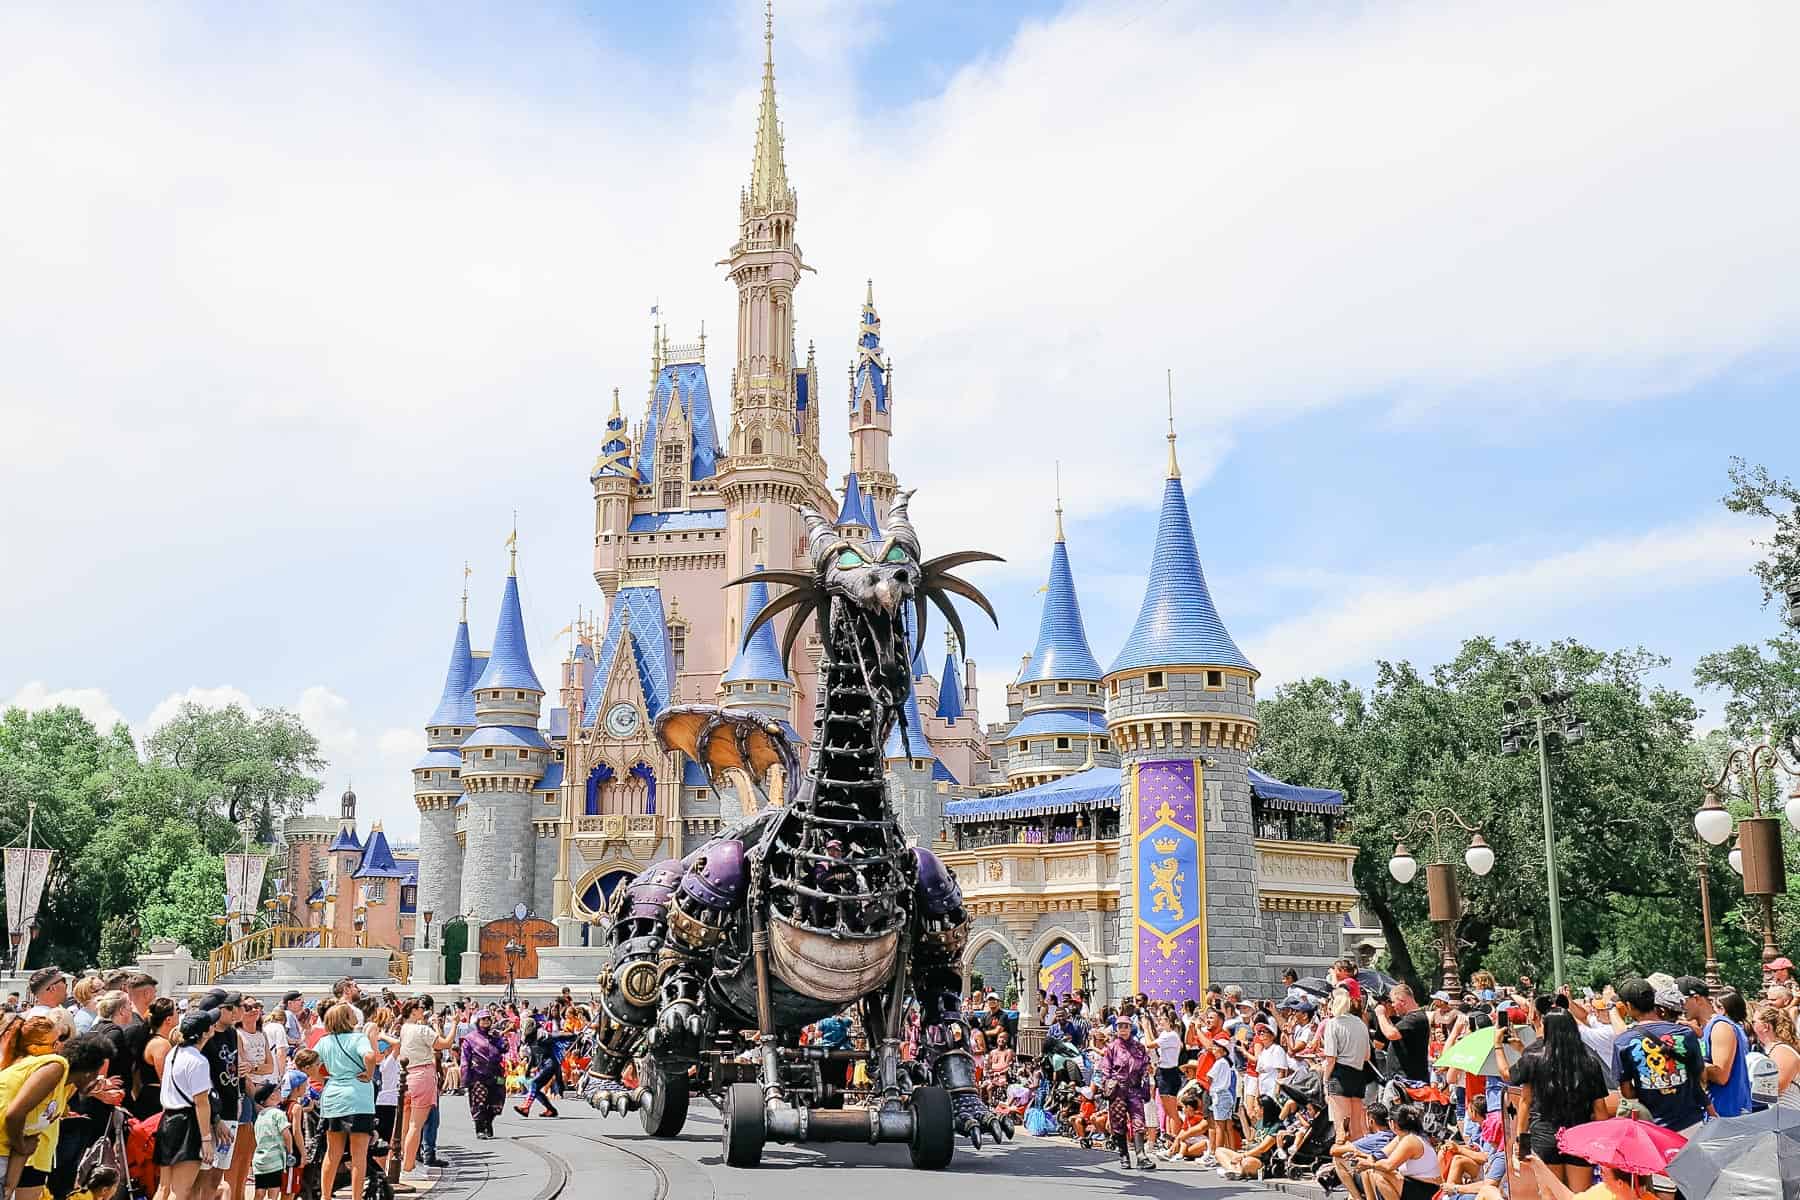 Maleficent's dragon before it breathes fire.